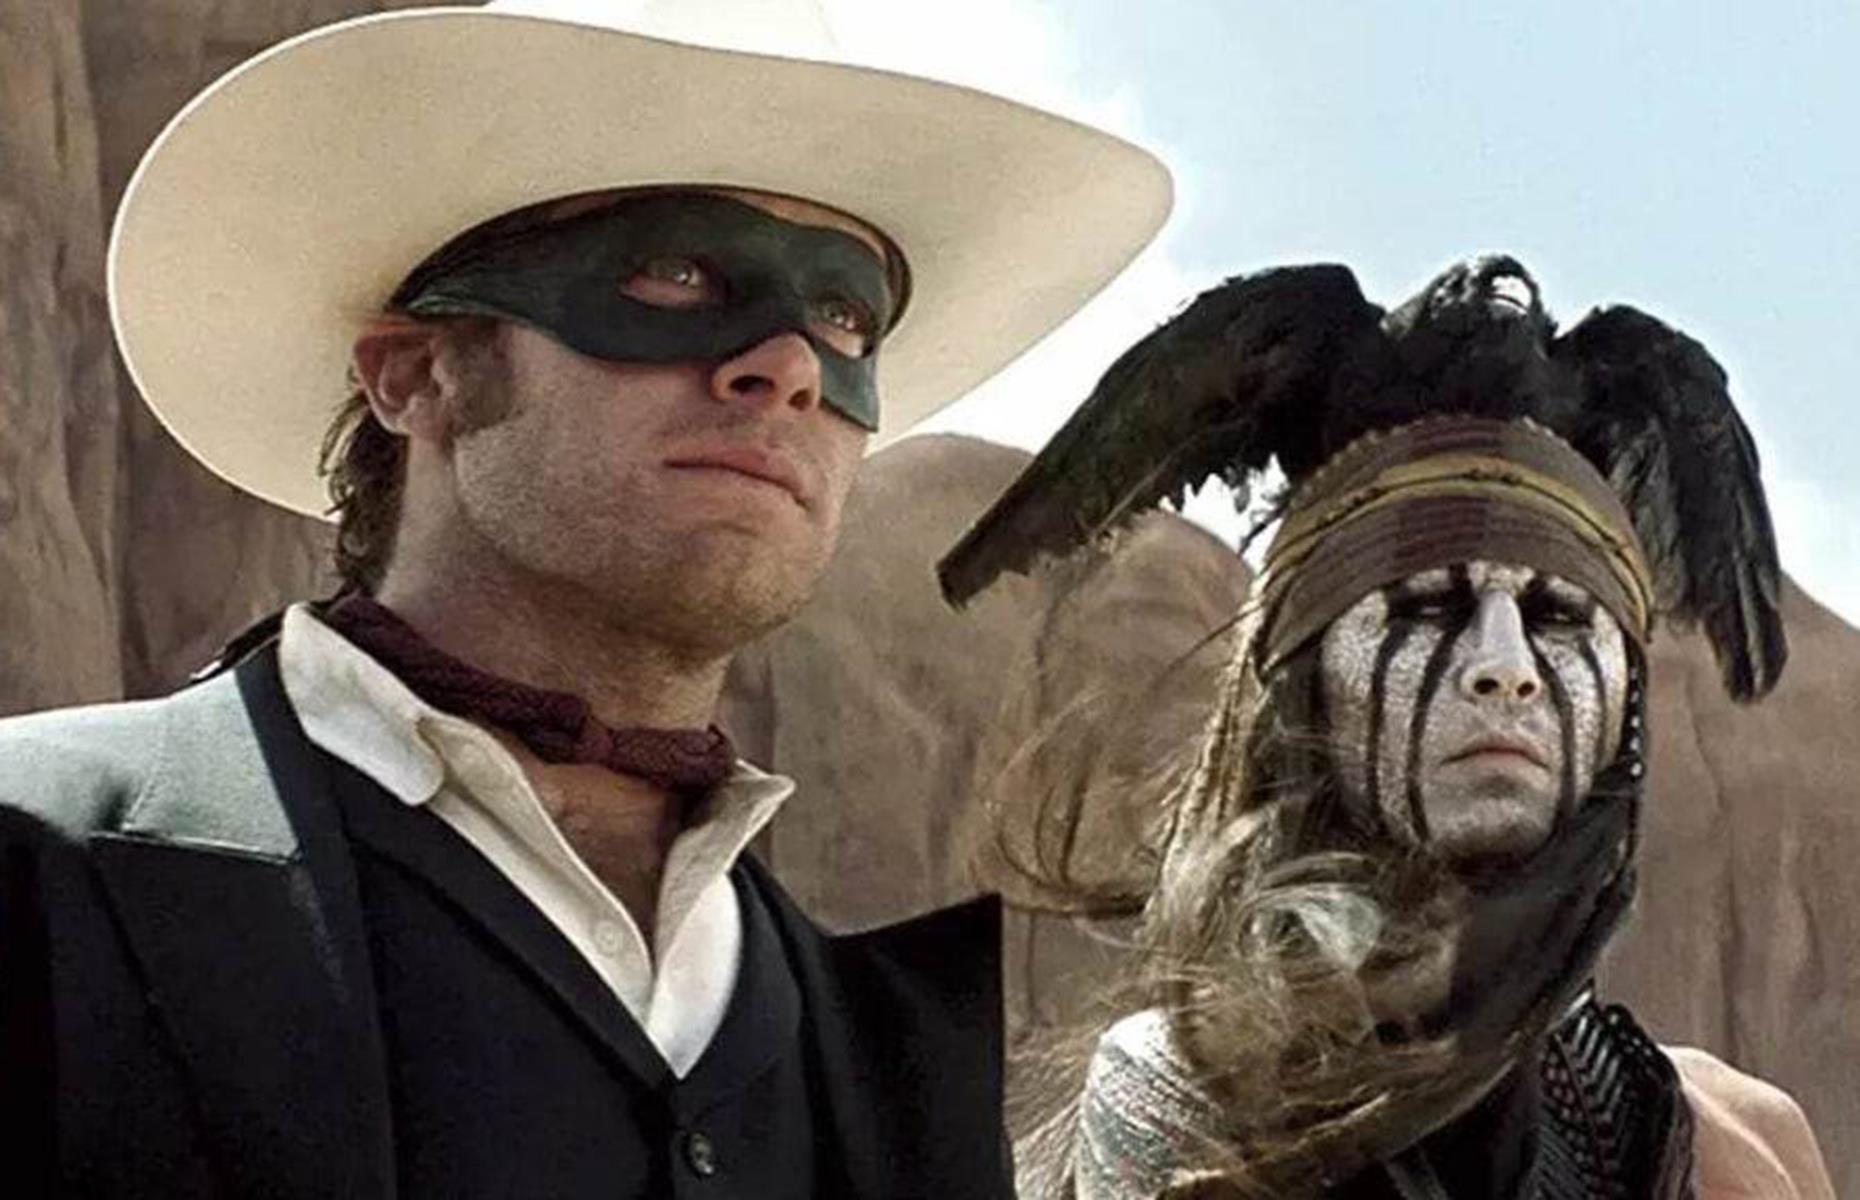 <p>On paper, 2013's <em>The Lone Ranger</em> looked like a guaranteed hit. After all, it boasted the star power of Johnny Depp, who had previously fronted the wildly successful<em> Pirates of the Caribbean </em>franchise for Disney.</p>  <p>Hoping to launch a new money-spinning live-action movie series, the studio handed the Western epic a massive $215 million production budget. However, the movie opened to a slate of negative reviews upon its release and pulled in just $260 million globally.</p>  <p>When factoring in additional costs, the film suffered losses estimated to range between $230 million and $277 million. Unsurprisingly, Disney ditched its plans for any future sequels.  </p>